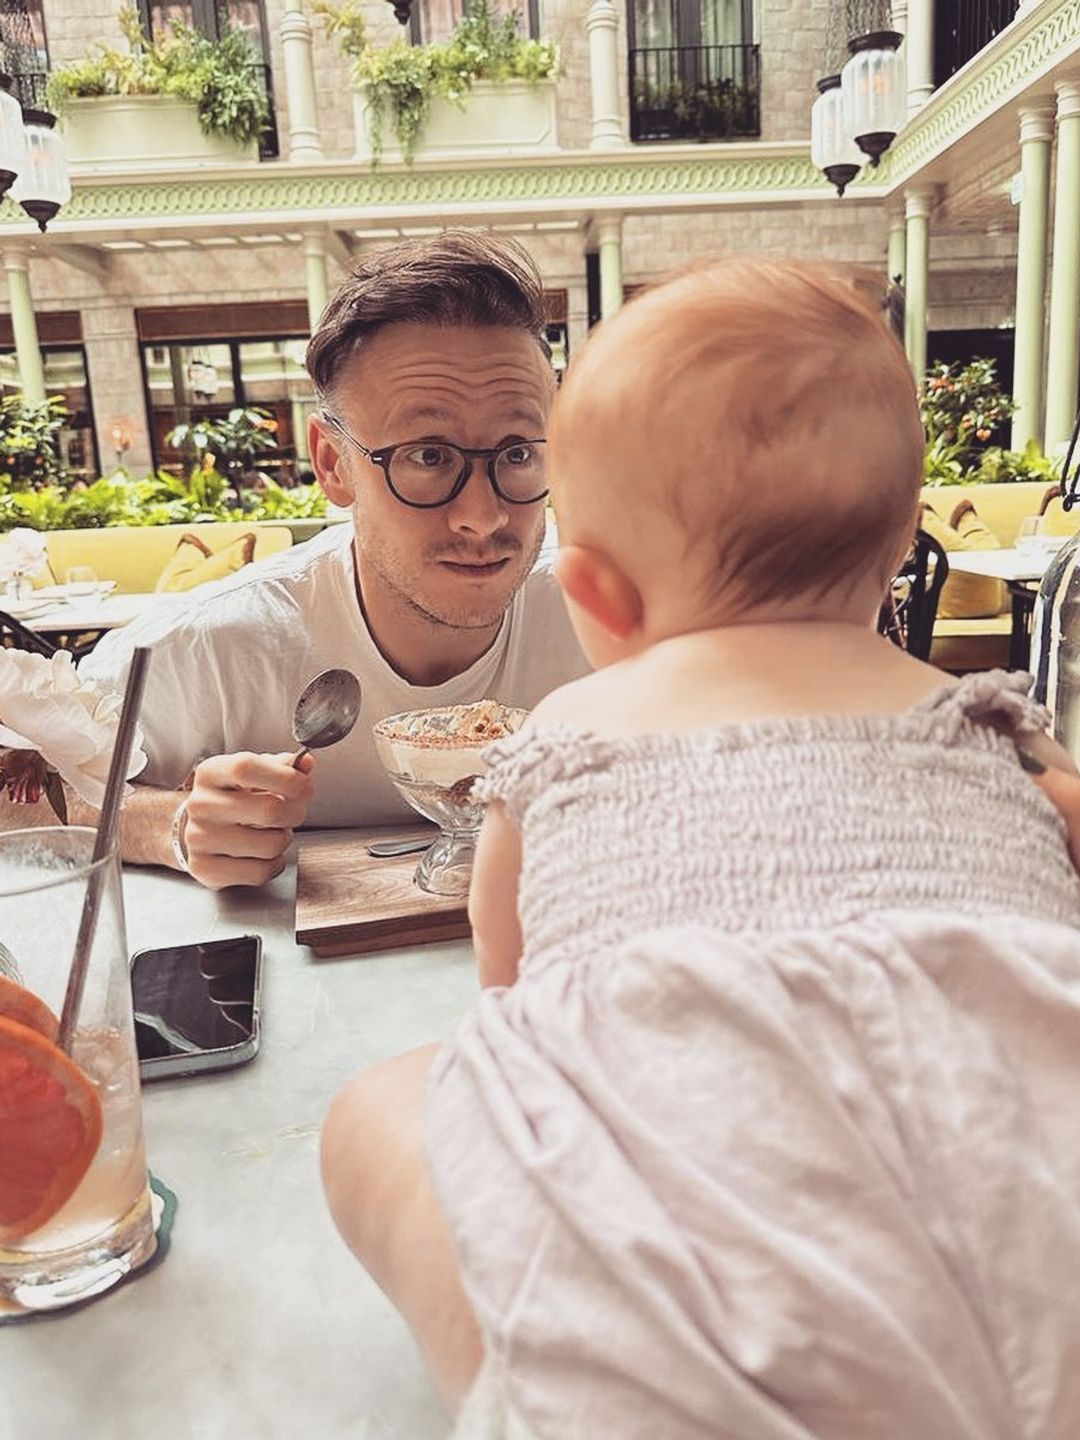 dad talking to baby daughter at table 